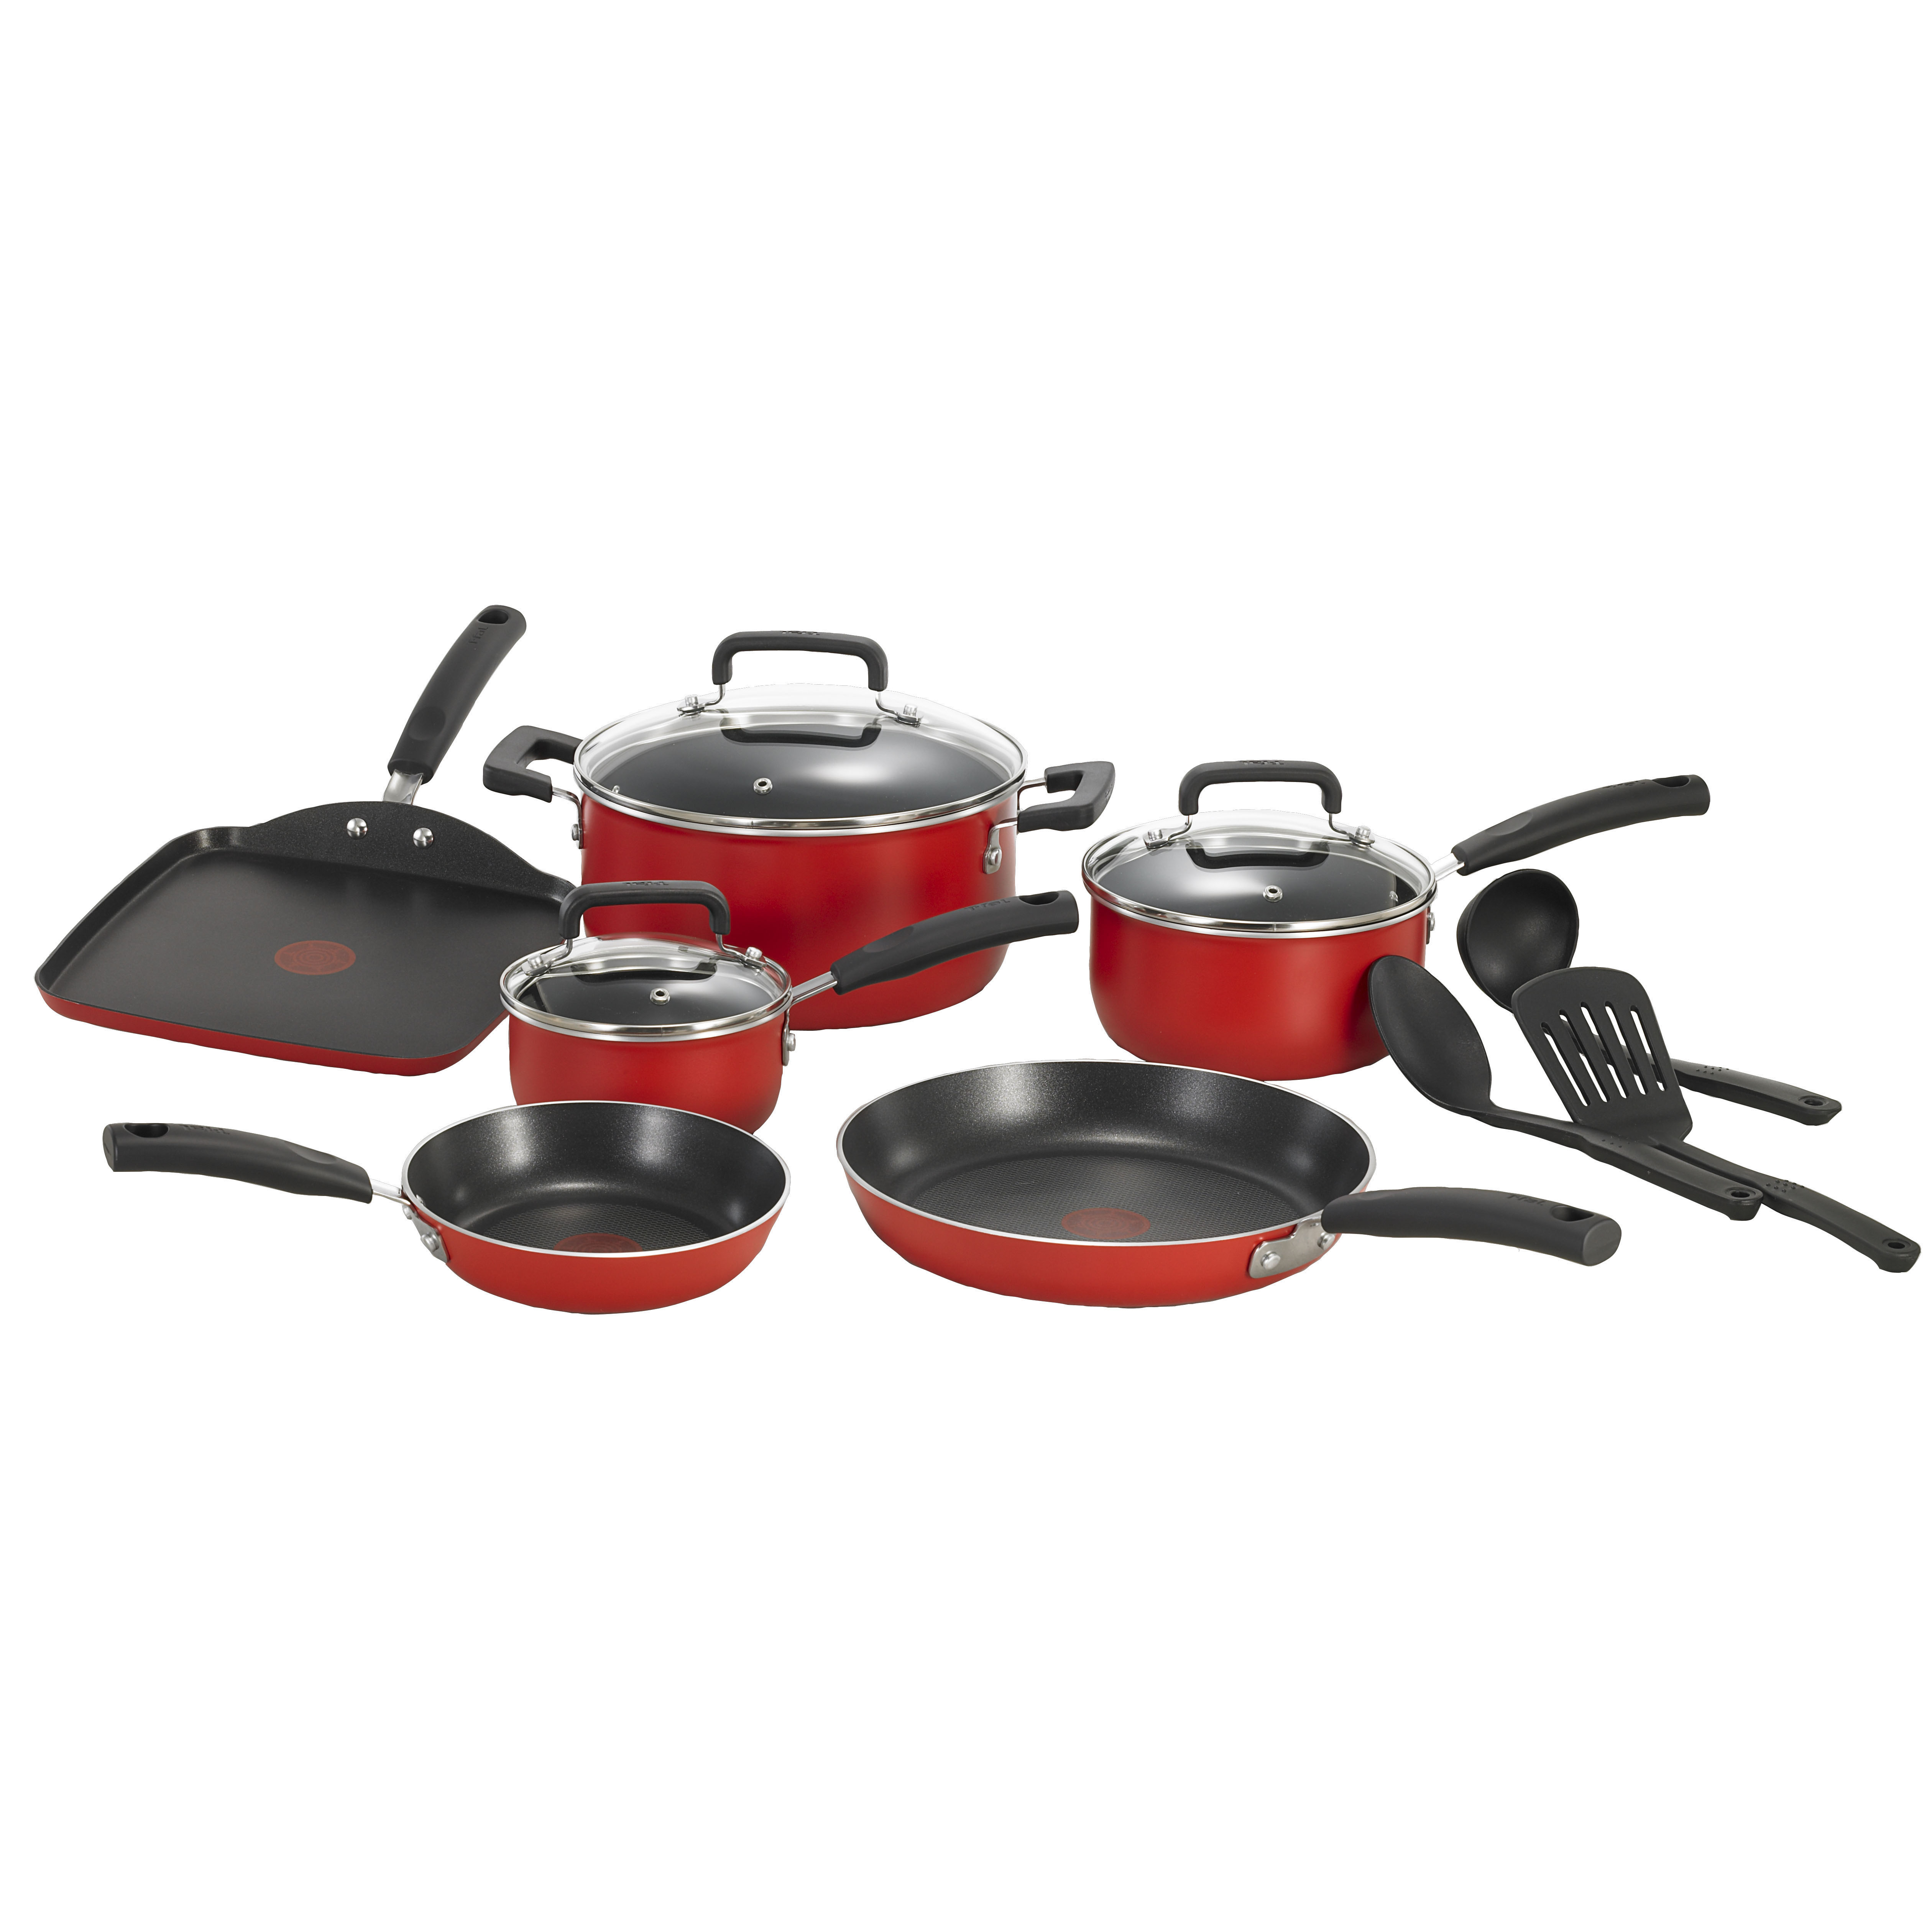 T-fal 12-Piece Signature Total Non-Stick Cookware in Red